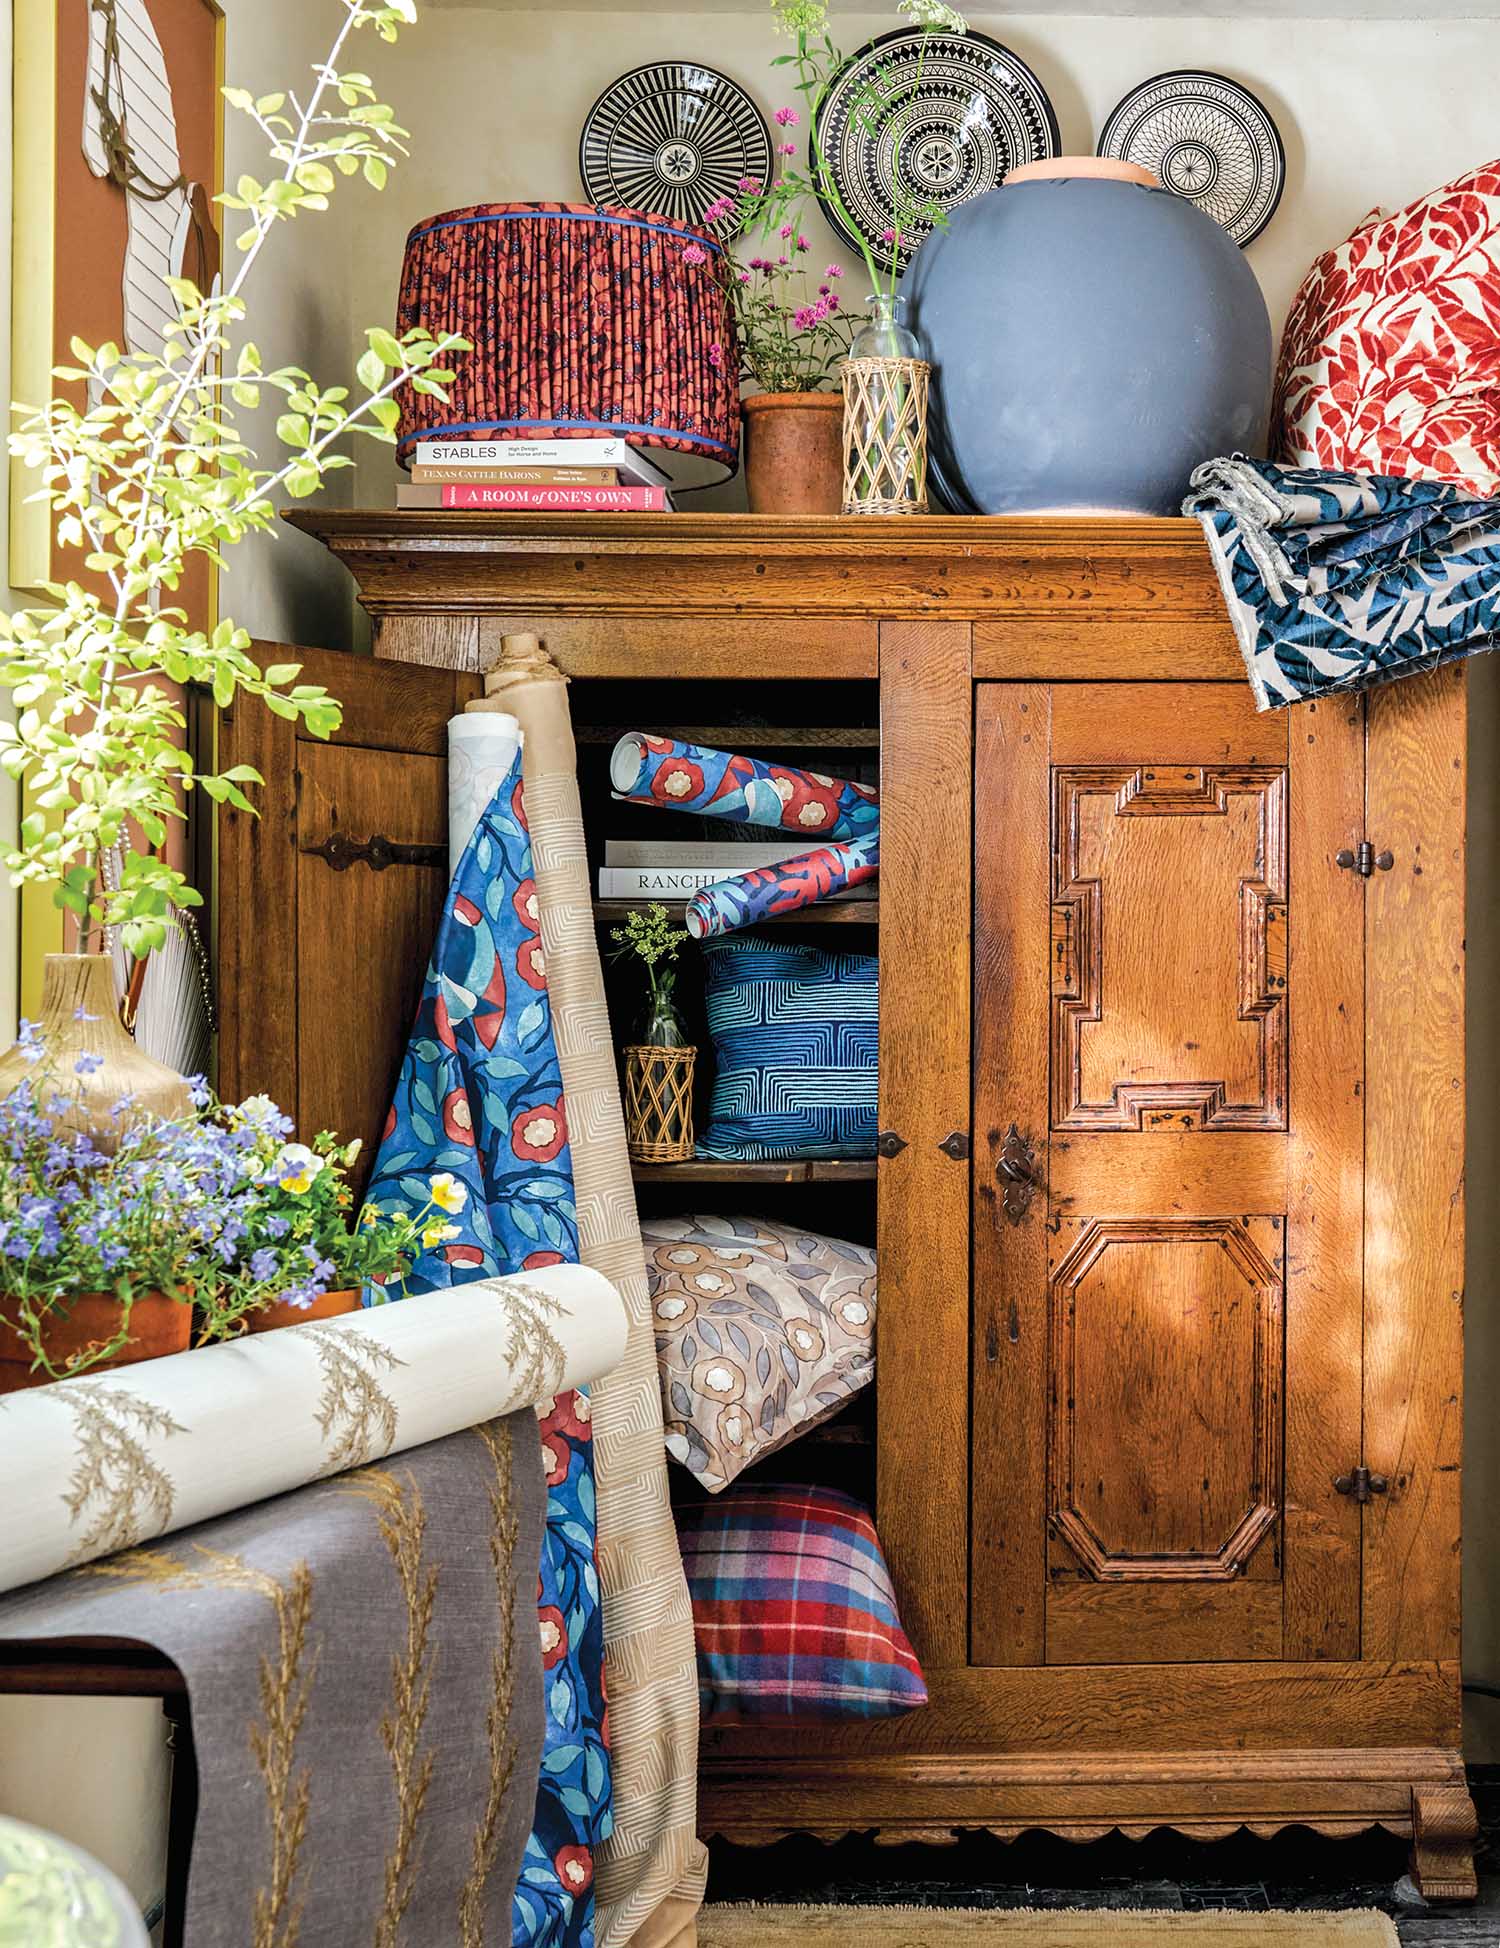 Fabrics, pillows, and lampshades are around a wooden cabinet.